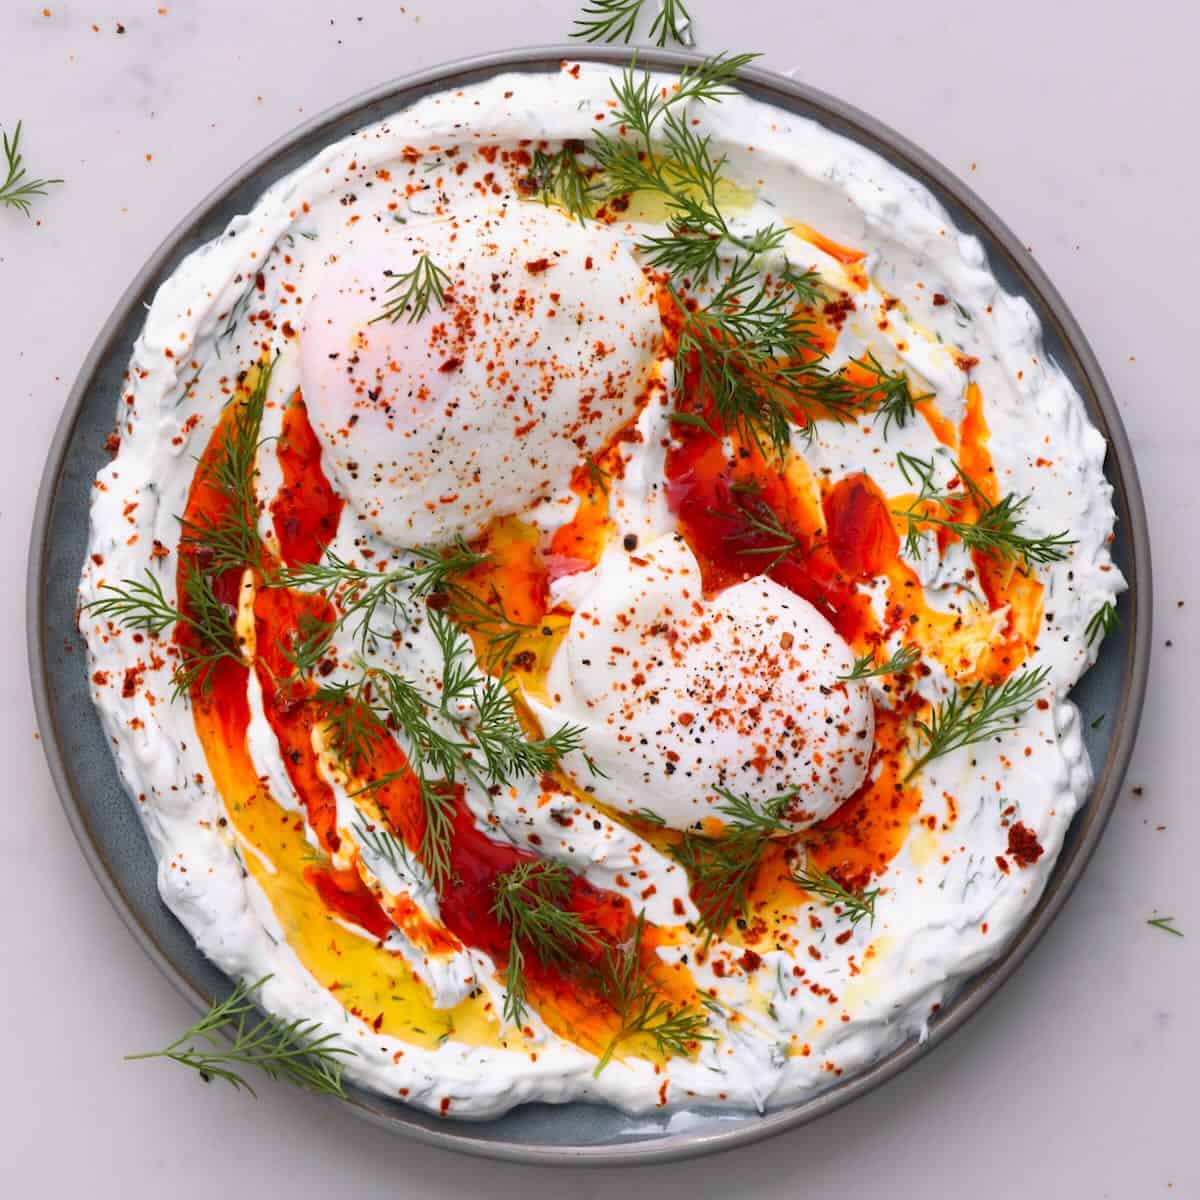 Turkish eggs topped with dill in a plate